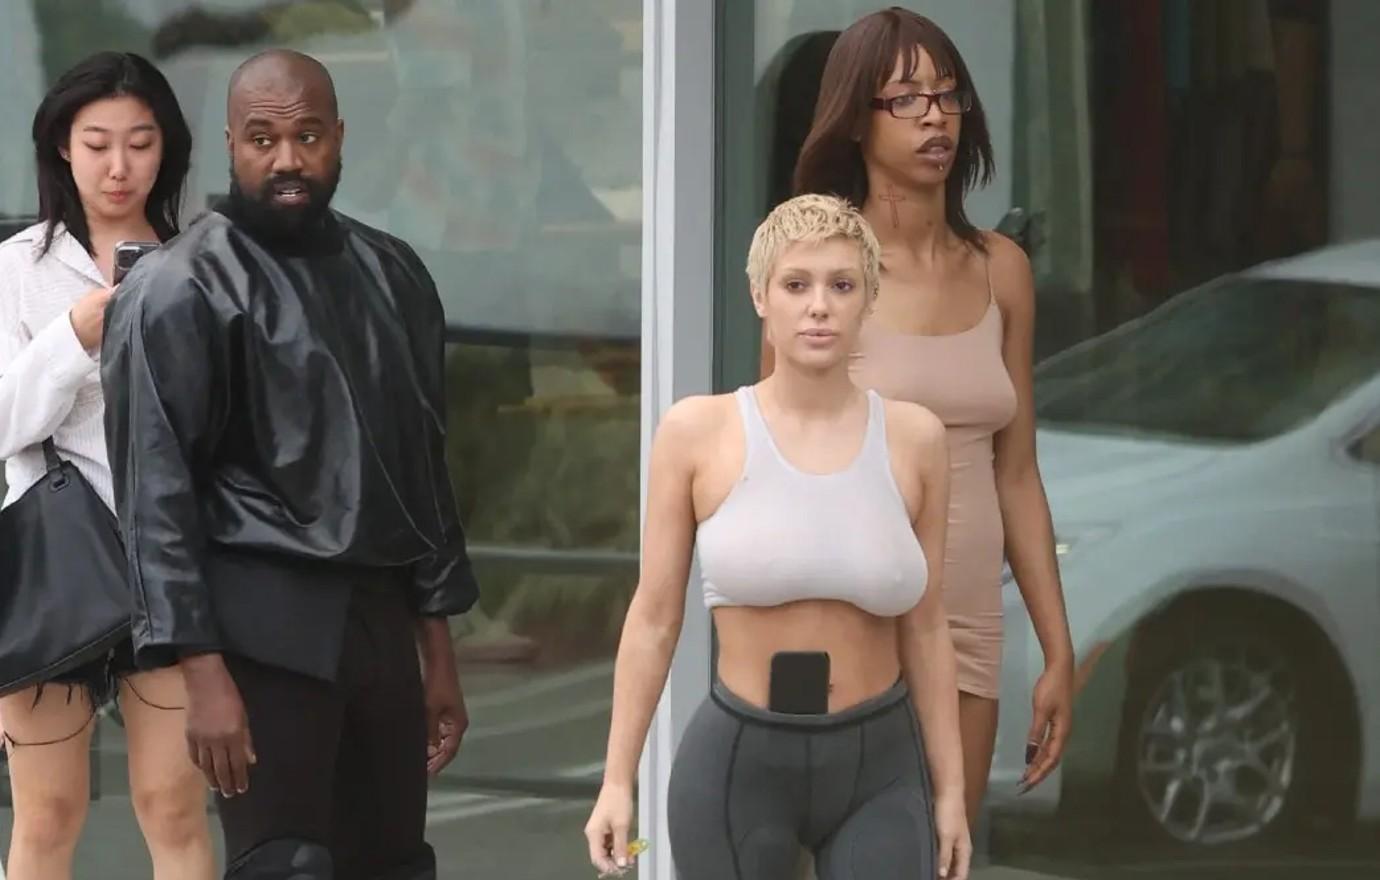 Kanye West's 'wife' steps out in see-through bodysuit without a bra